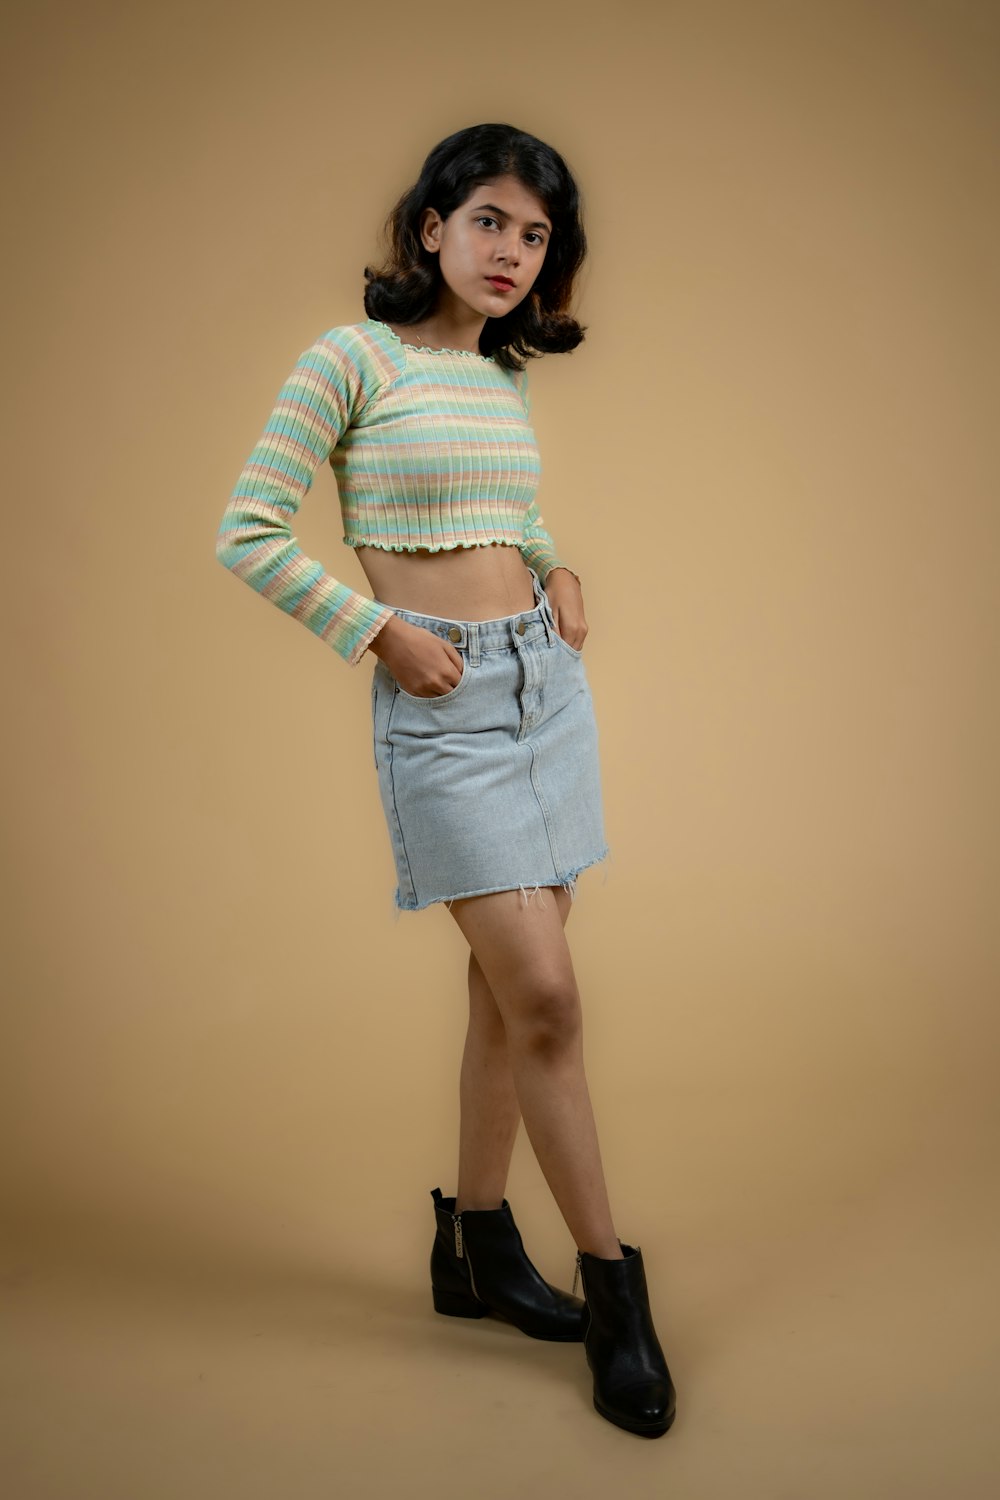 a woman in a striped shirt and denim skirt